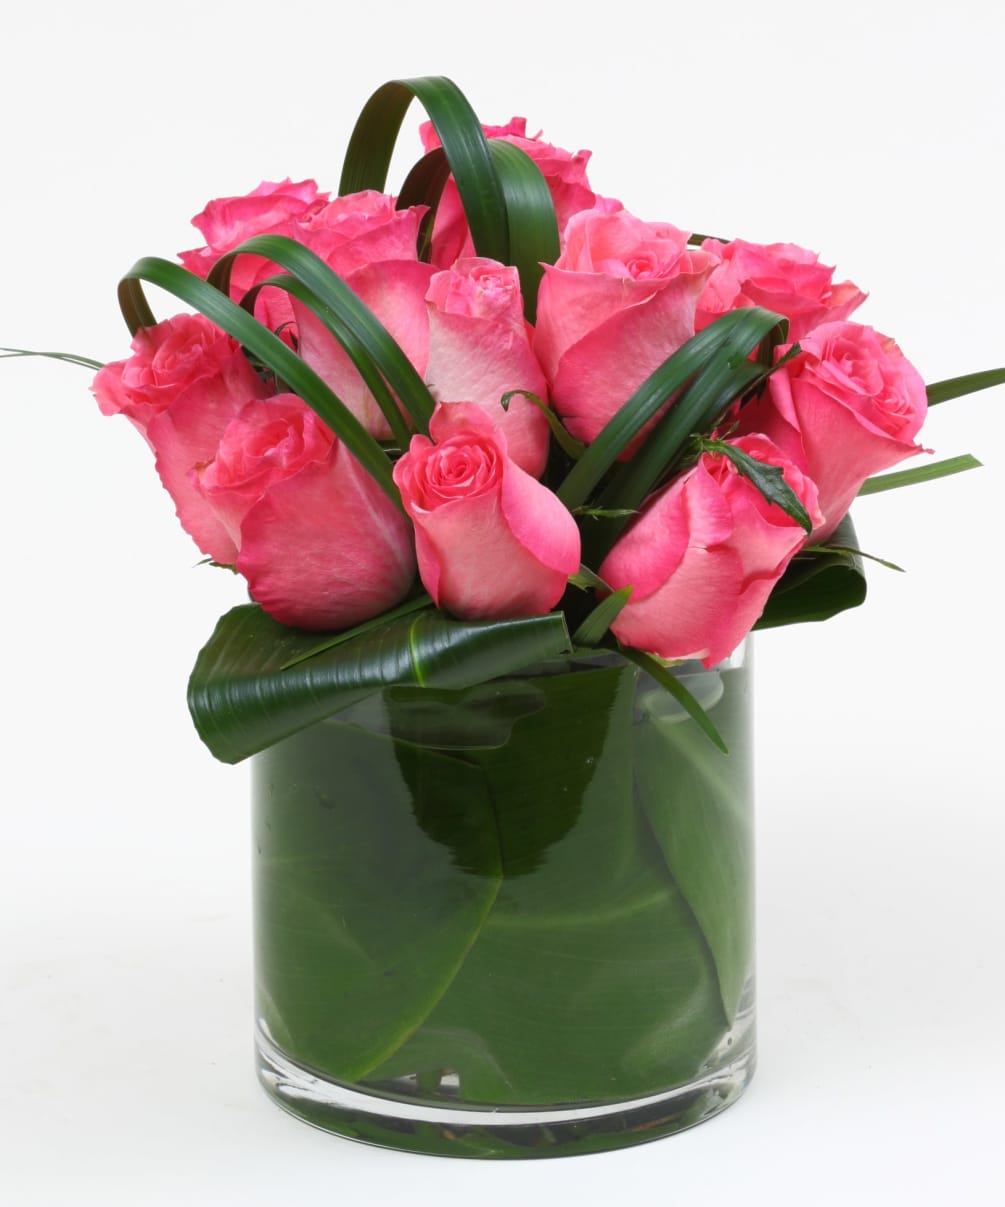 Ribbons of greenery make this offering of roses extra special.  